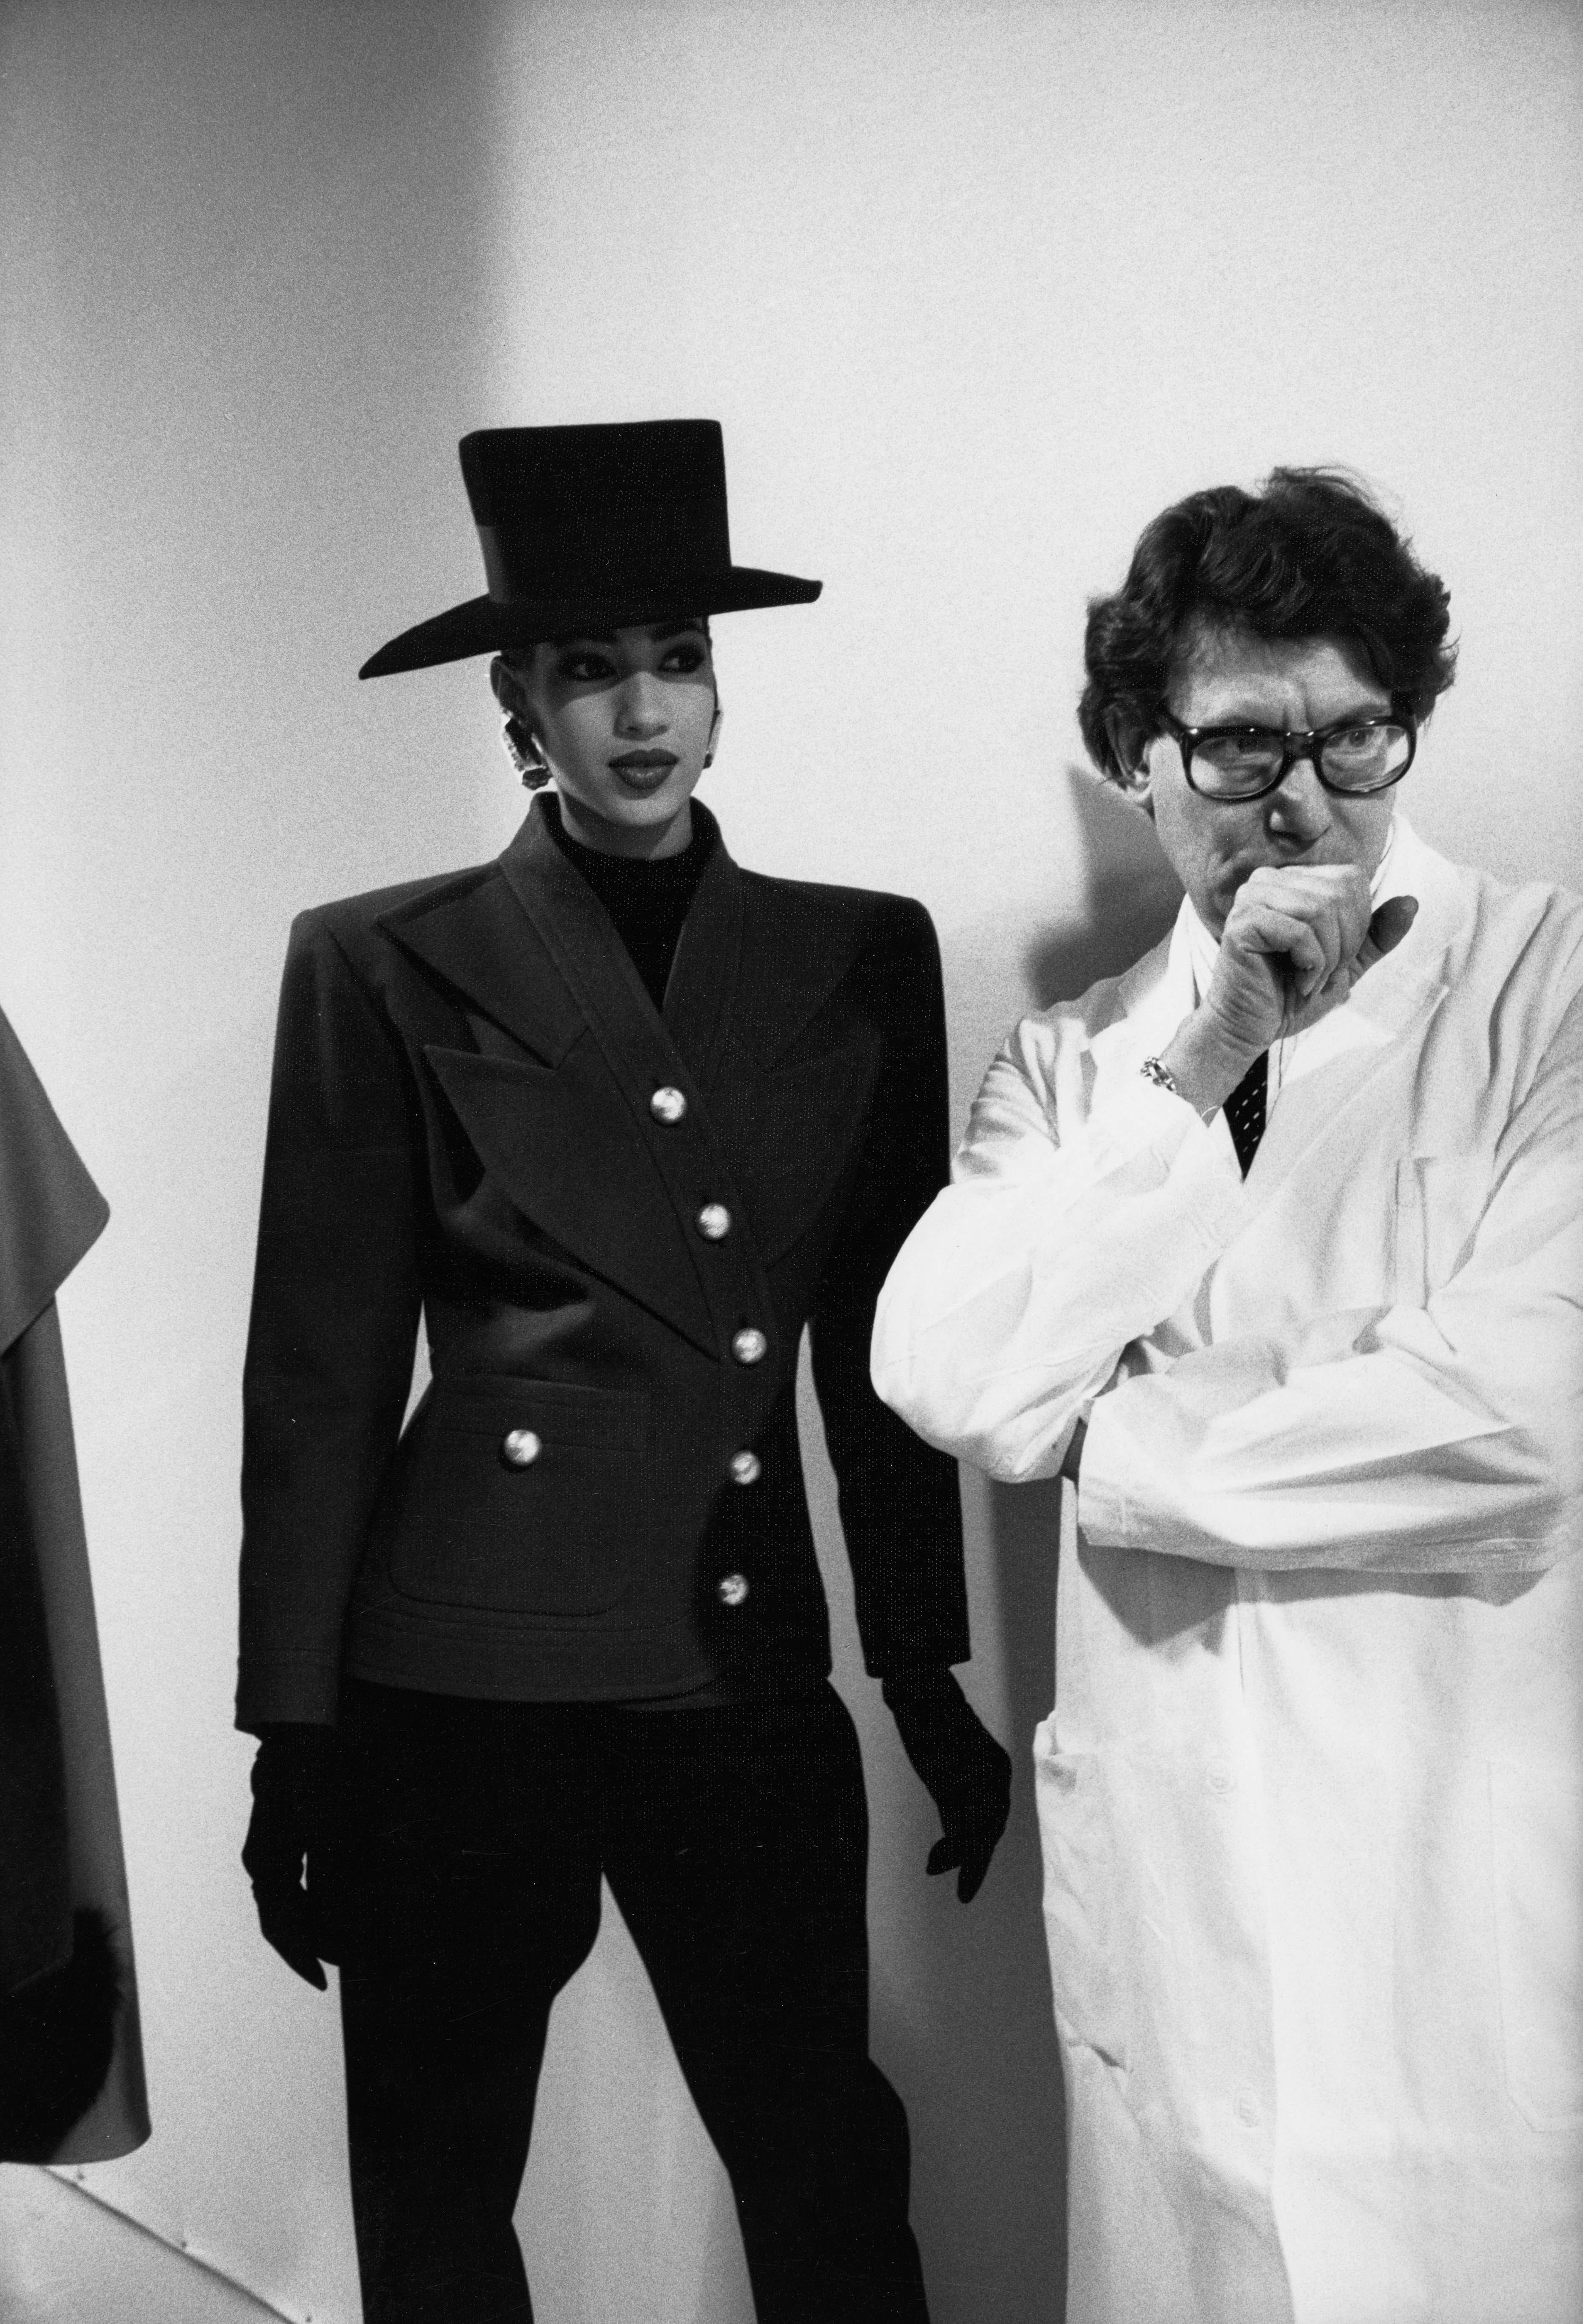 Inside 'Yves Saint Laurent: Form and Fashion